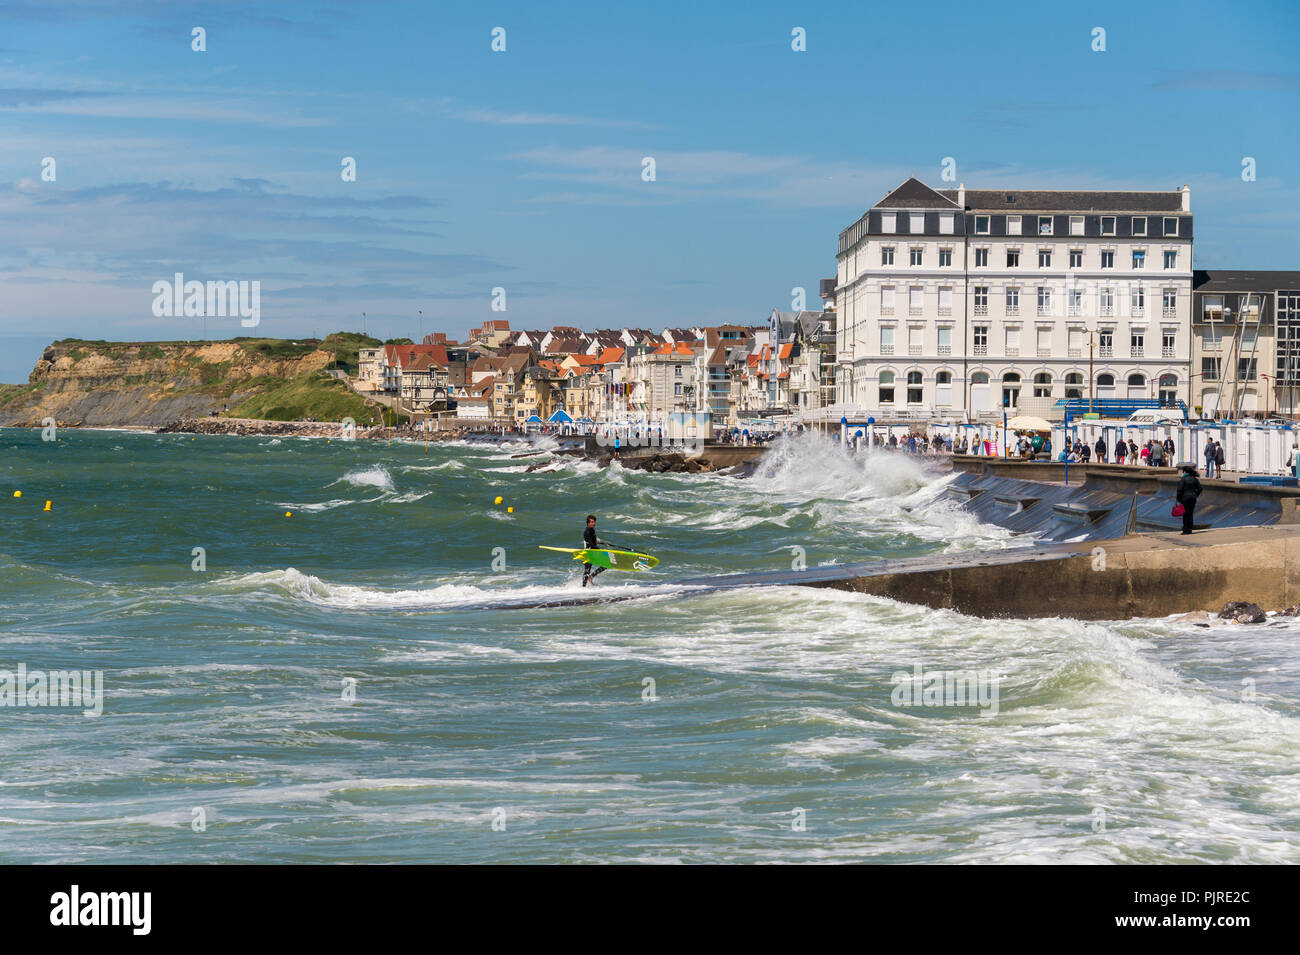 Wimereux, France - 16 June 2018: View of the sea front promenade as waves are hitting the seawall. Stock Photo